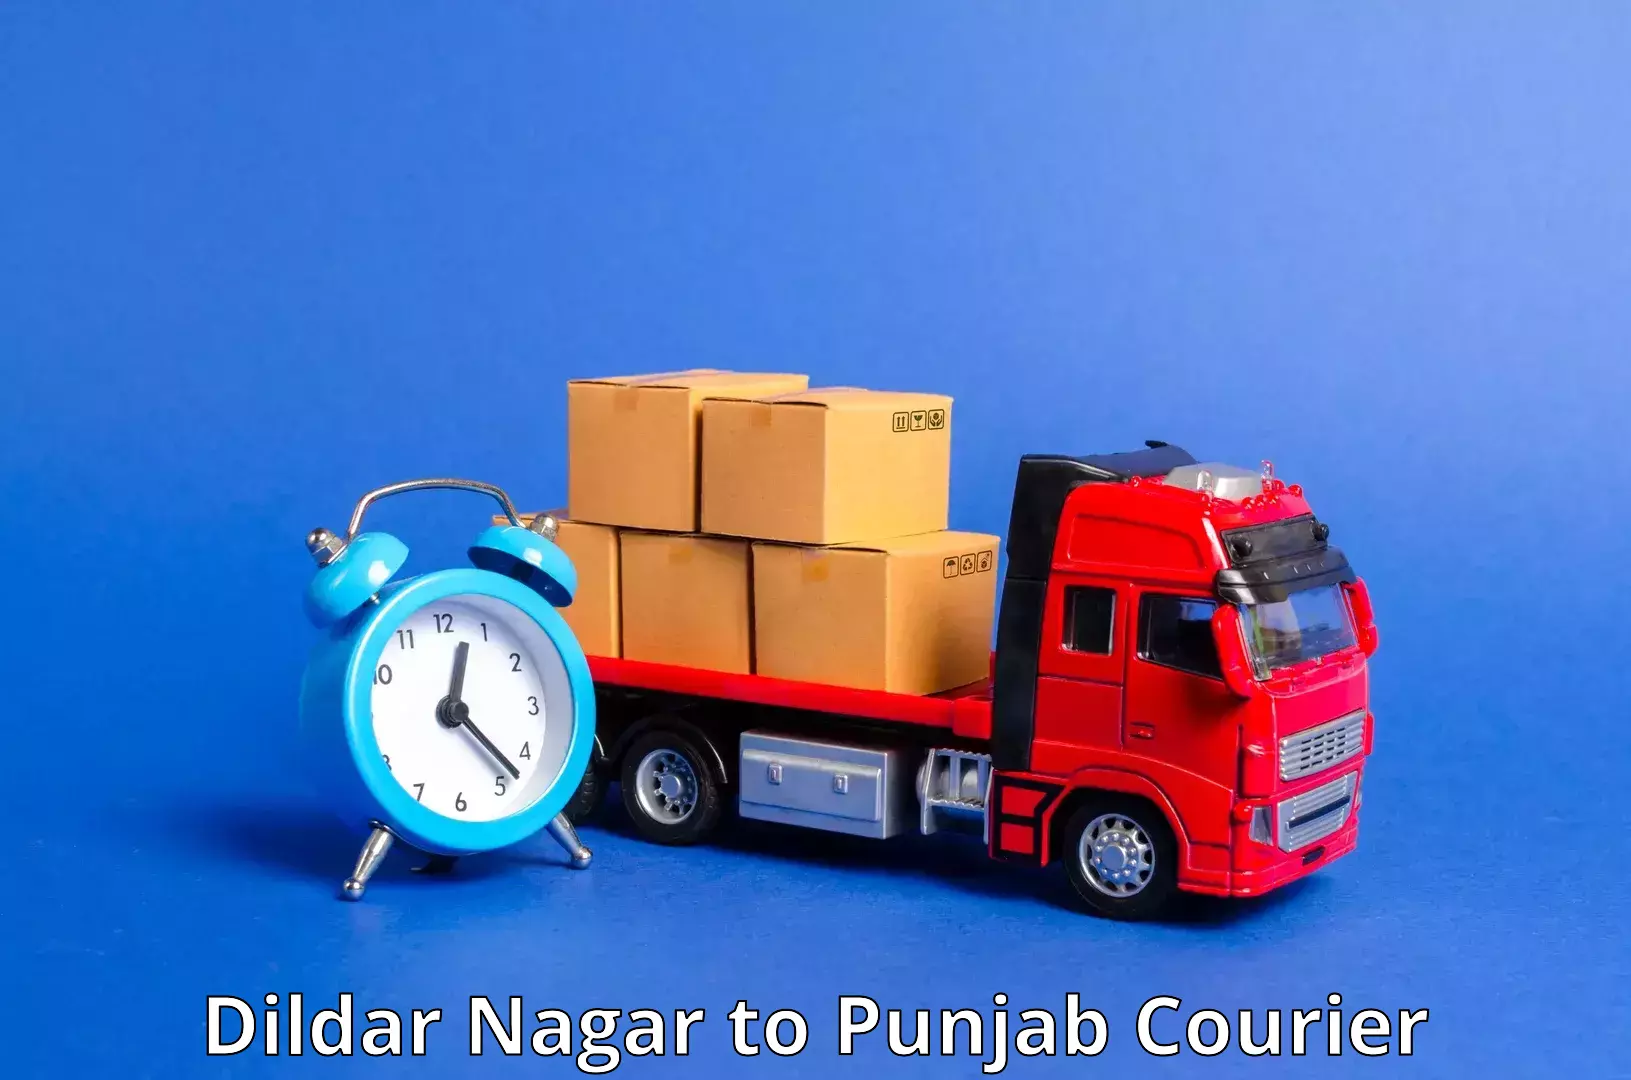 State-of-the-art courier technology Dildar Nagar to Begowal